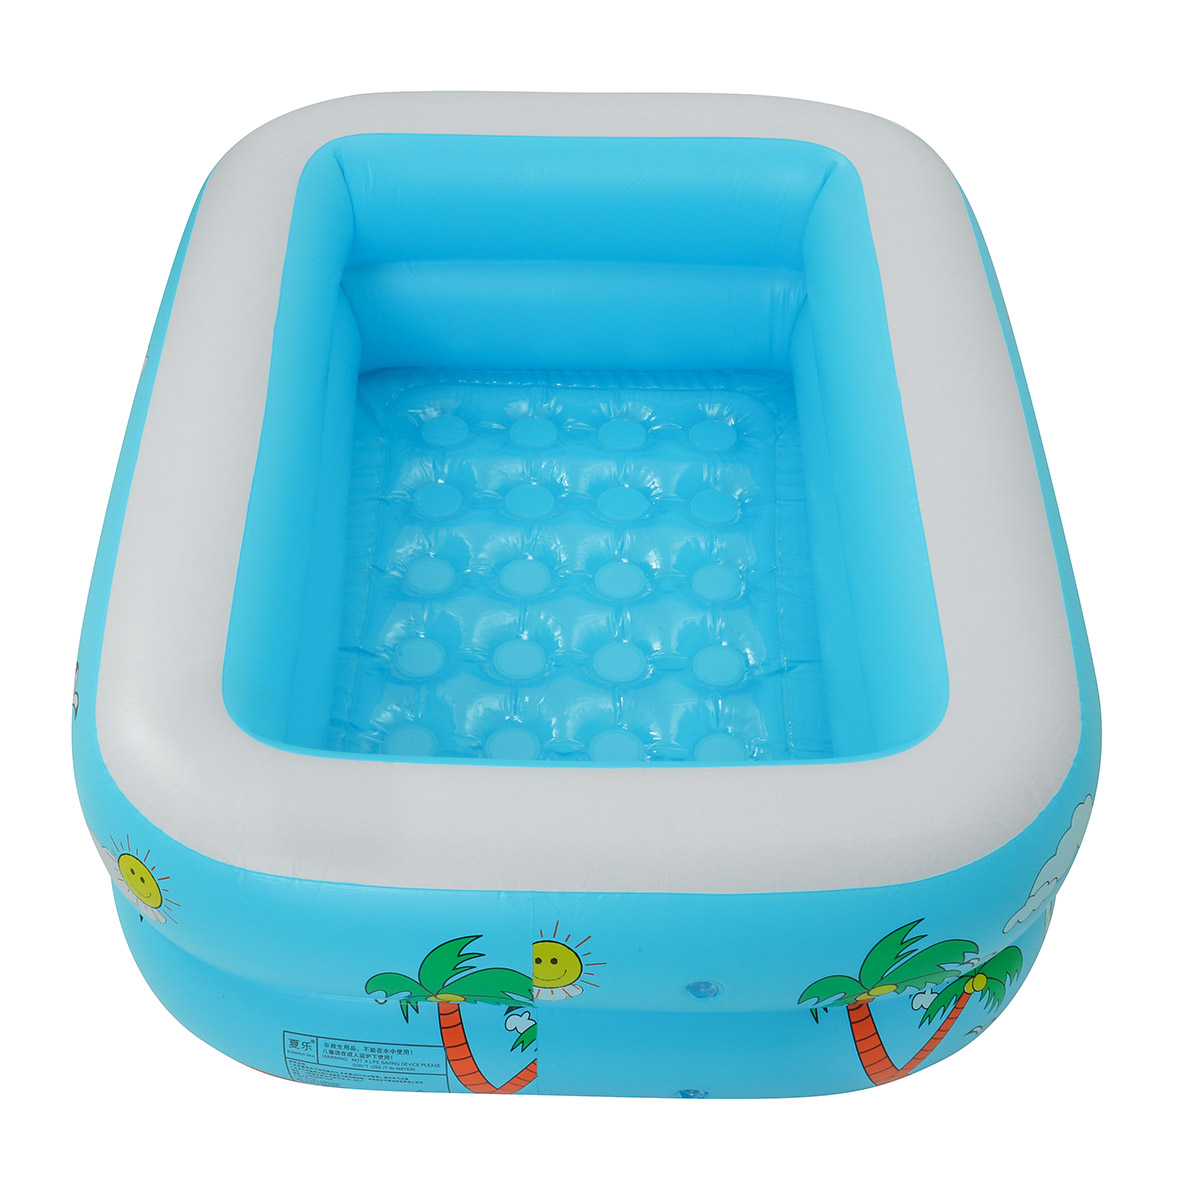 120-150CM-Family-Inflatable-Swimming-Pool-3-Ring-Thicken-Summer-Backyard-Inflate-Bathtub-for-Kids-Ad-1696845-9